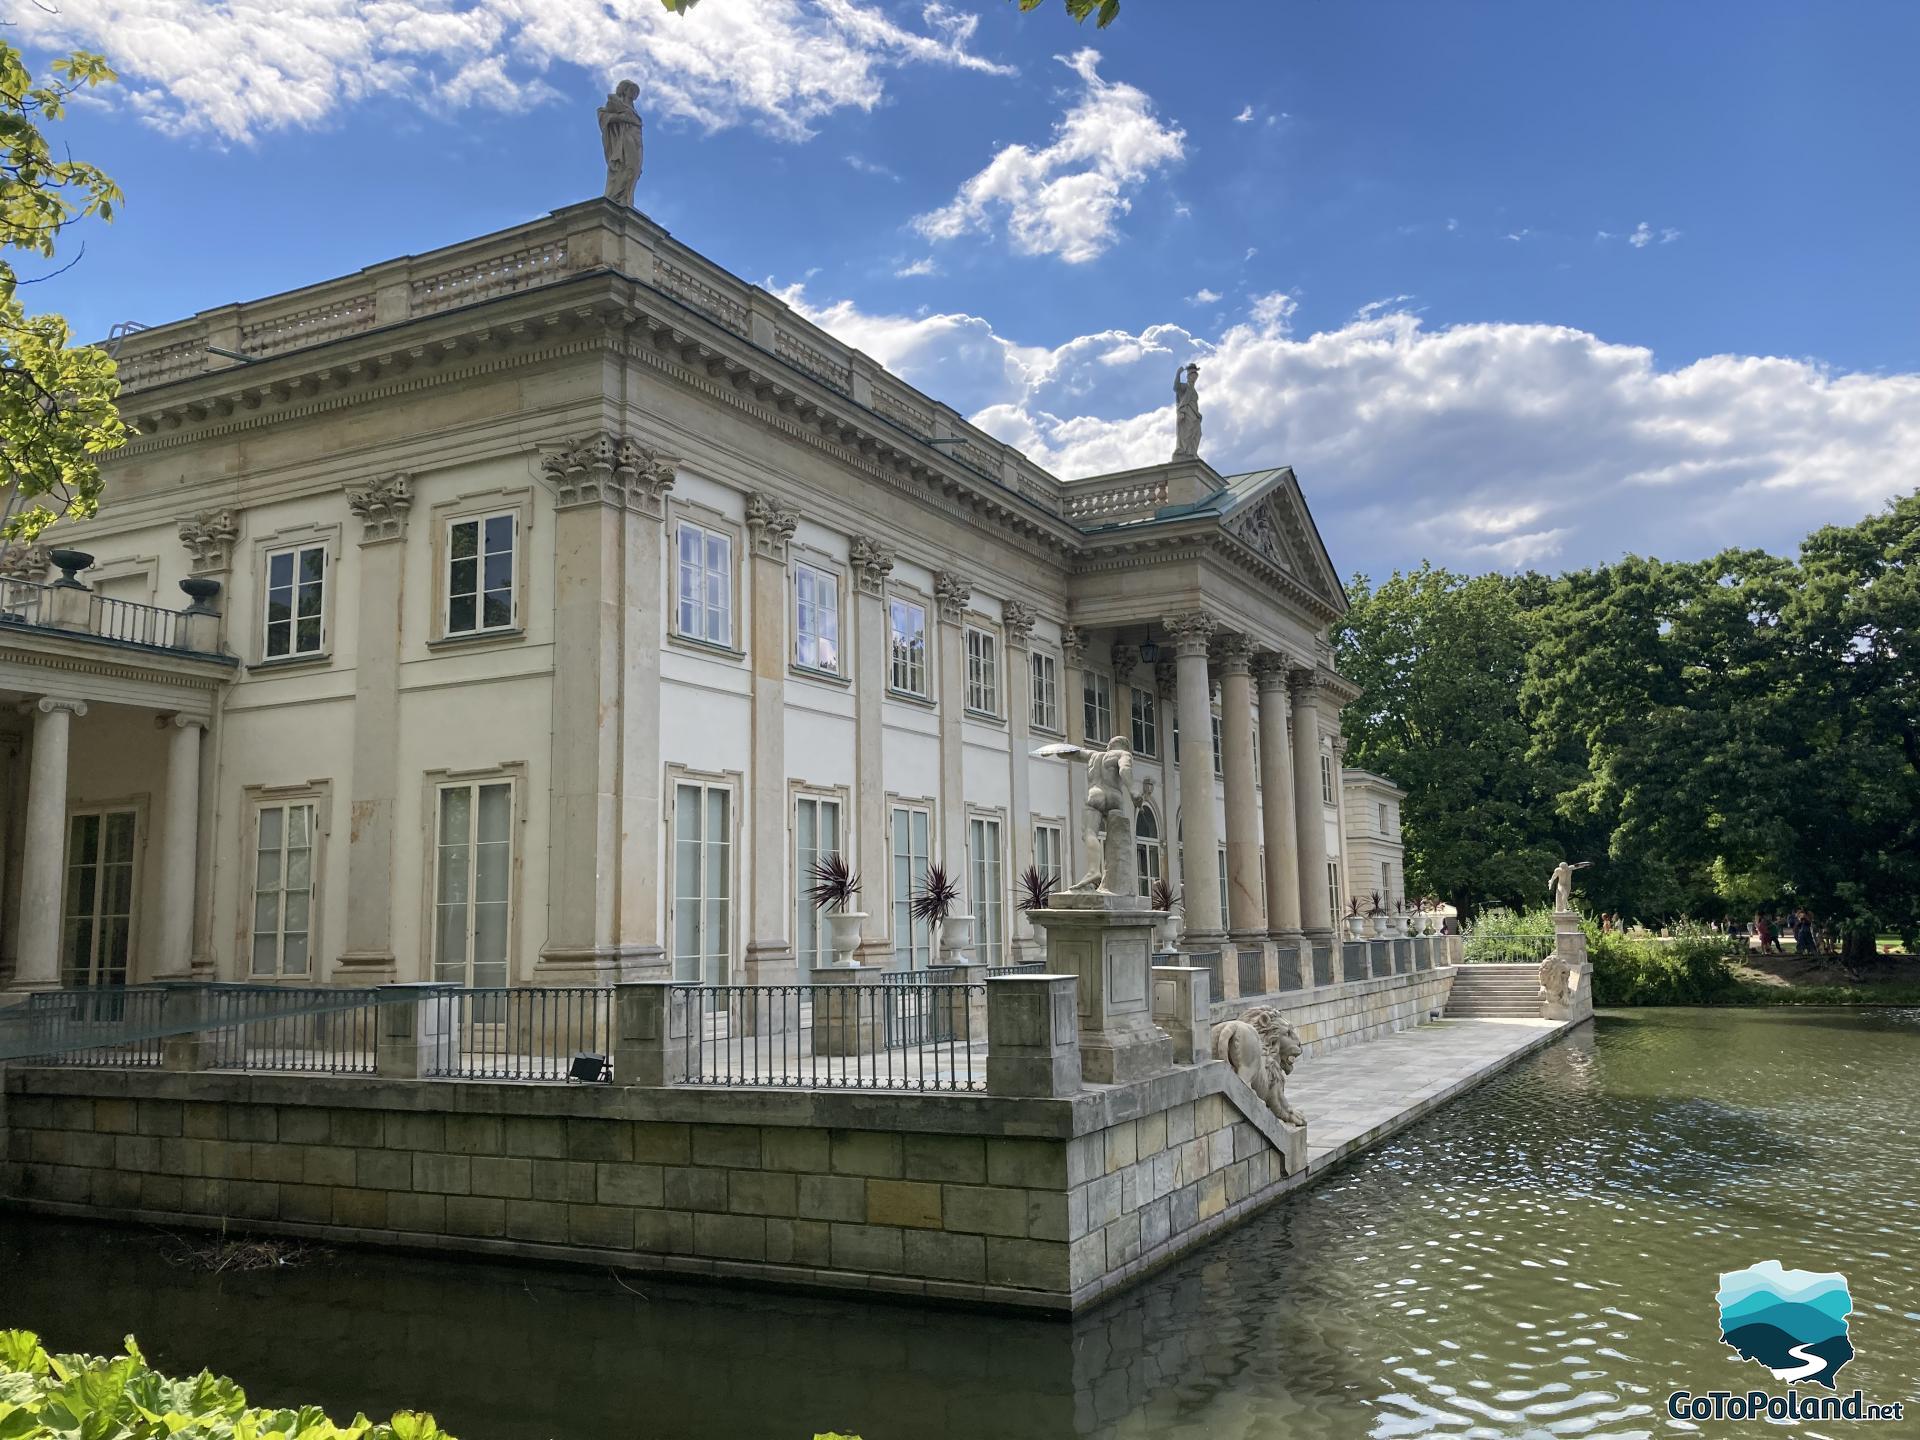 a palace with bright walls, two sculptures of lions and four columns, the palace is located on the water